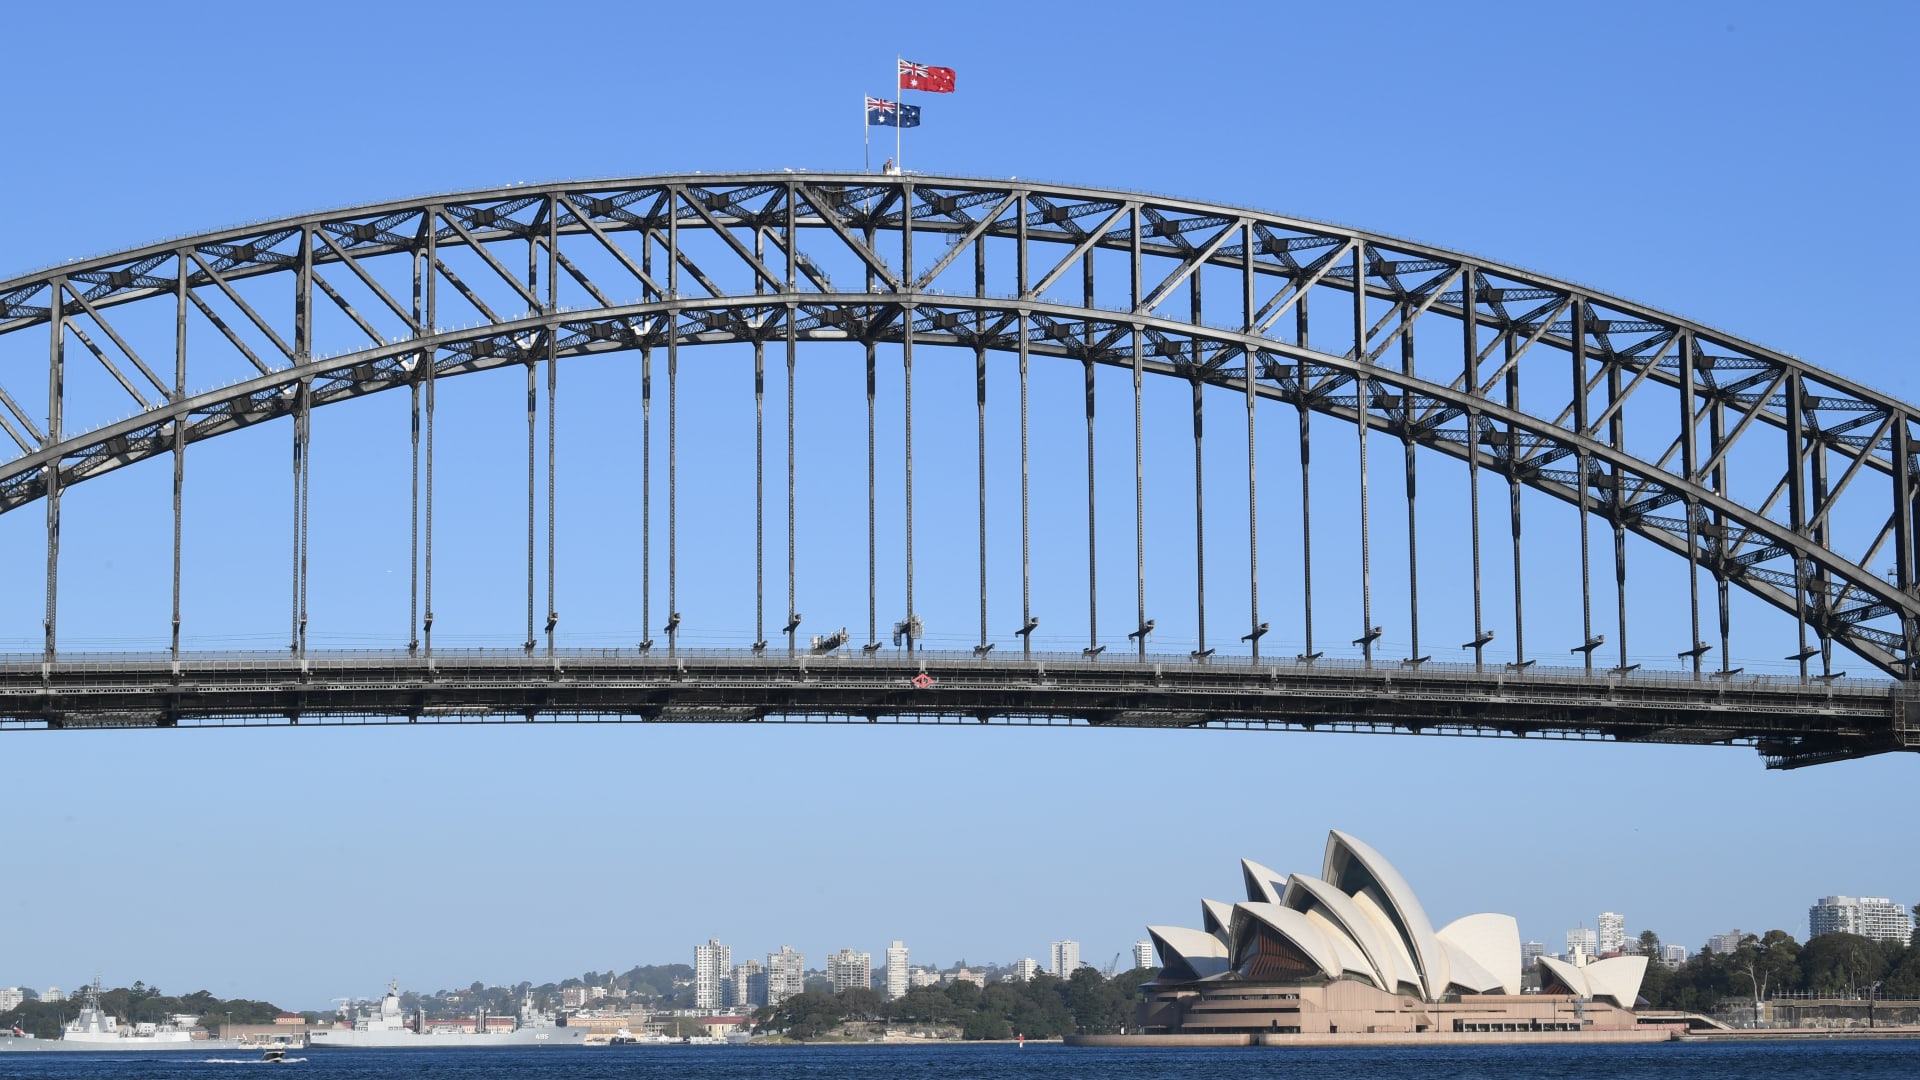 A red ensign flies atop the Sydney Harbour Bridge to commemorate Merchant Navy Day on September 03, 2021 in Sydney, Australia.